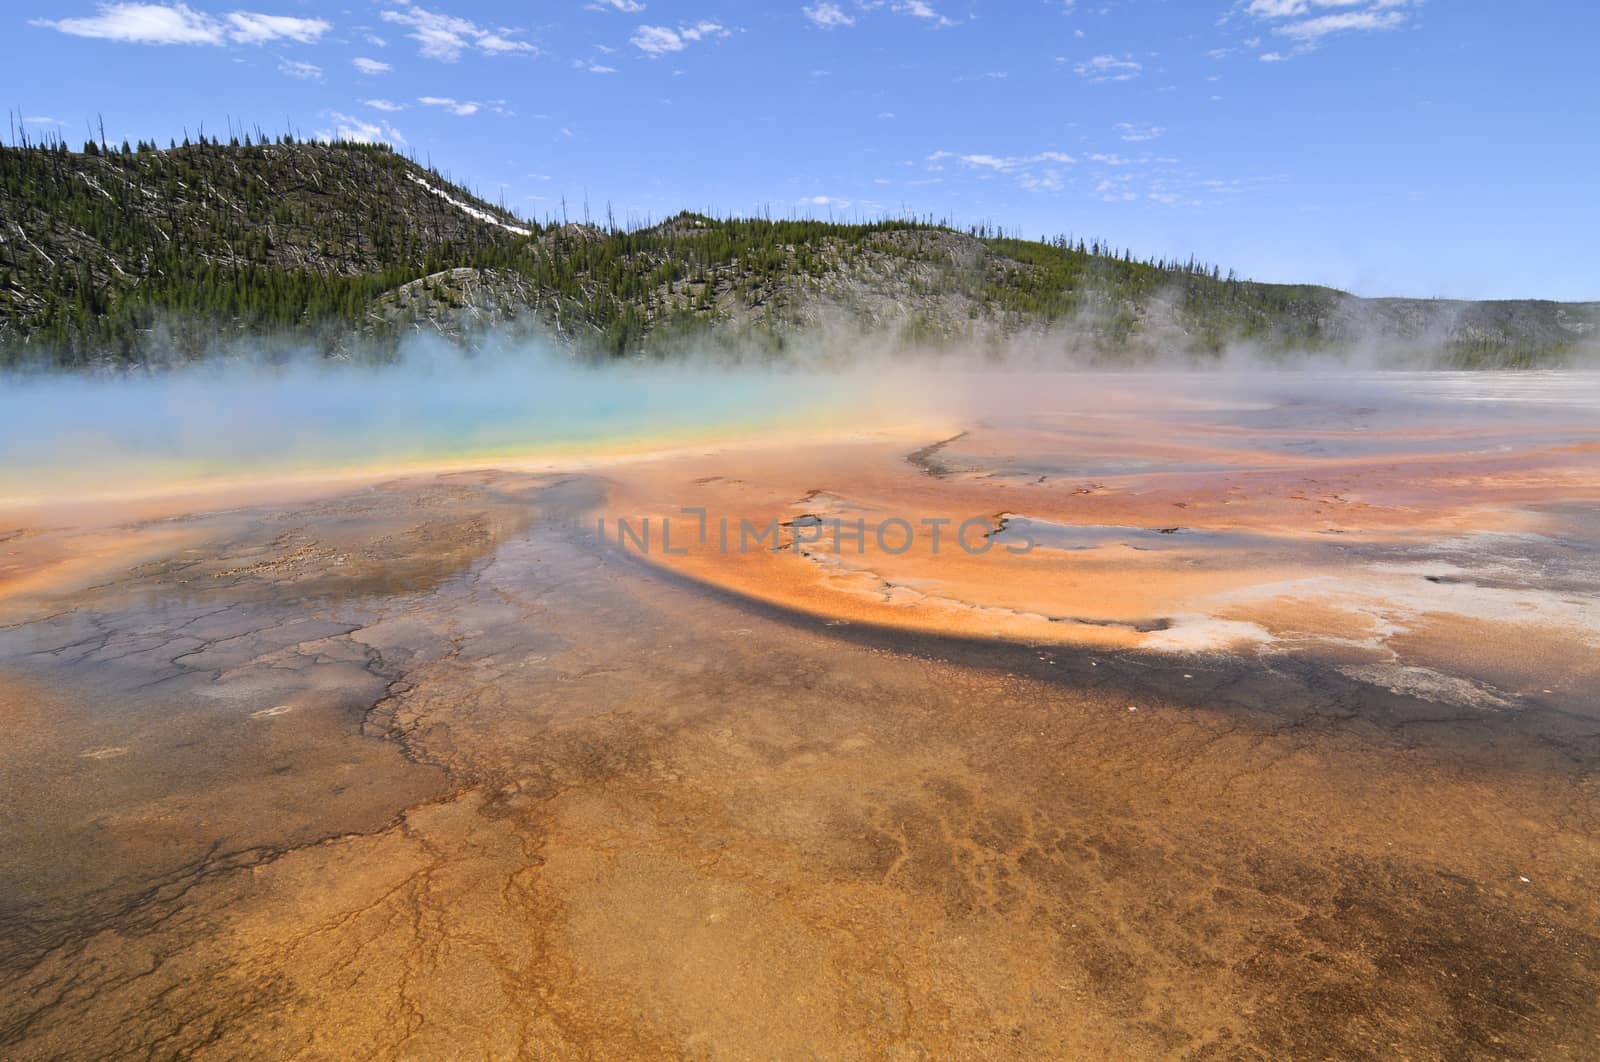 Grand Prismatic Spring as they  walking along path in Midway Geyser Basin, Yellowstone National Park, Wyoming